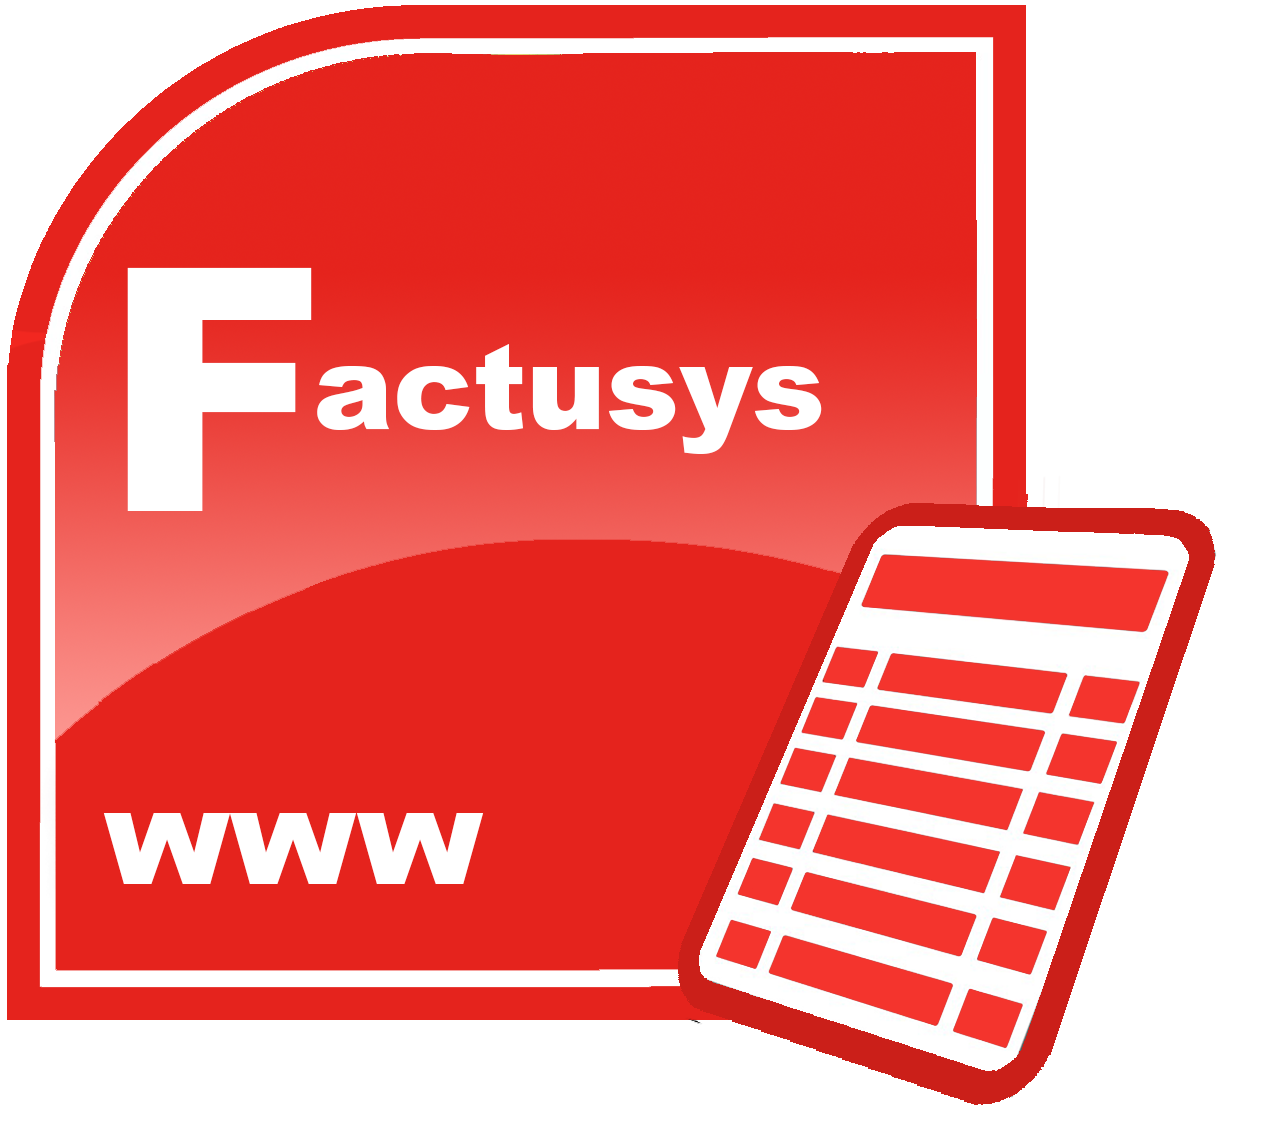 factusys_www.png - 409.23 kB